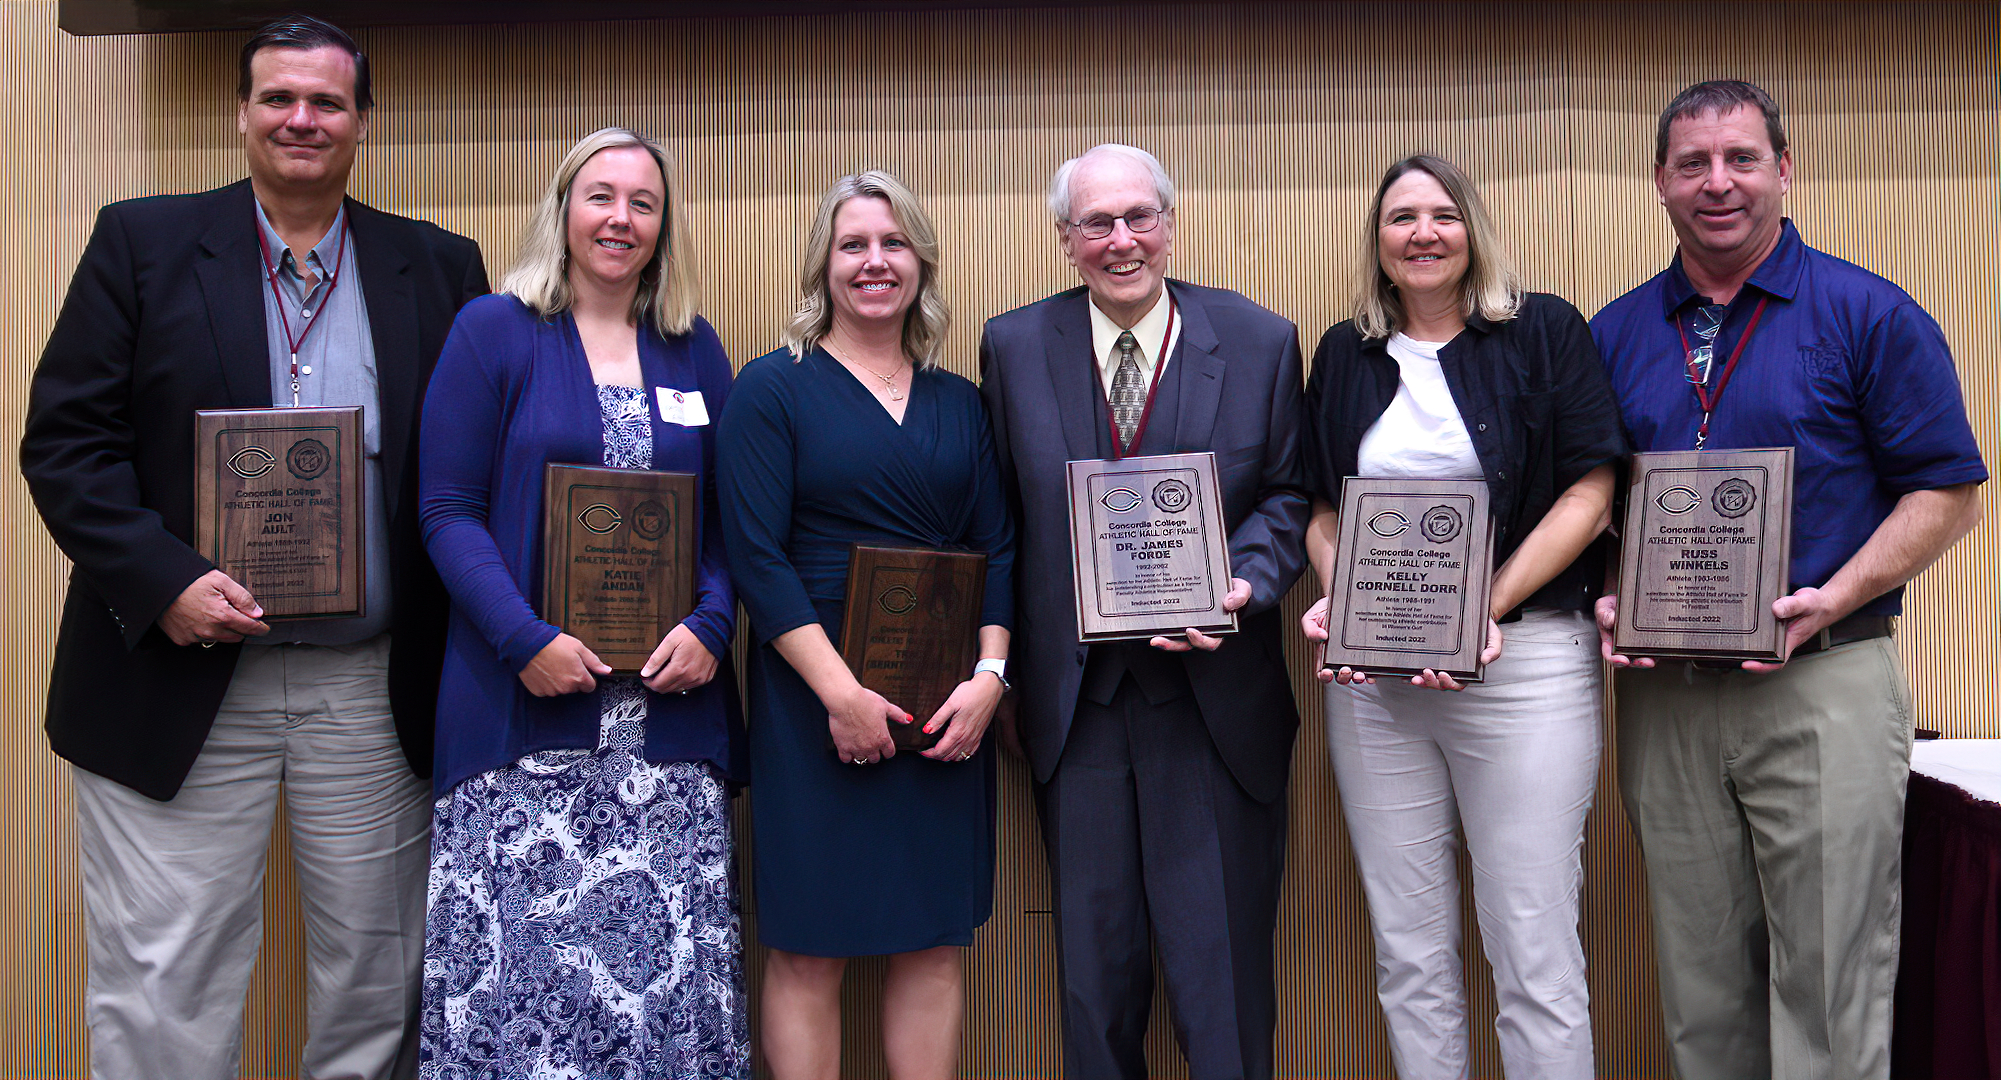 (L-R) Jon Ault '92, Katie (Jacques) Andan '03, Tracy (Berntsen) Beil '95, Dr. James Forde, Kelly Cornell Dorr '92 & Russ Winkels '86 were inducted into the Athletic Hall of Fame.